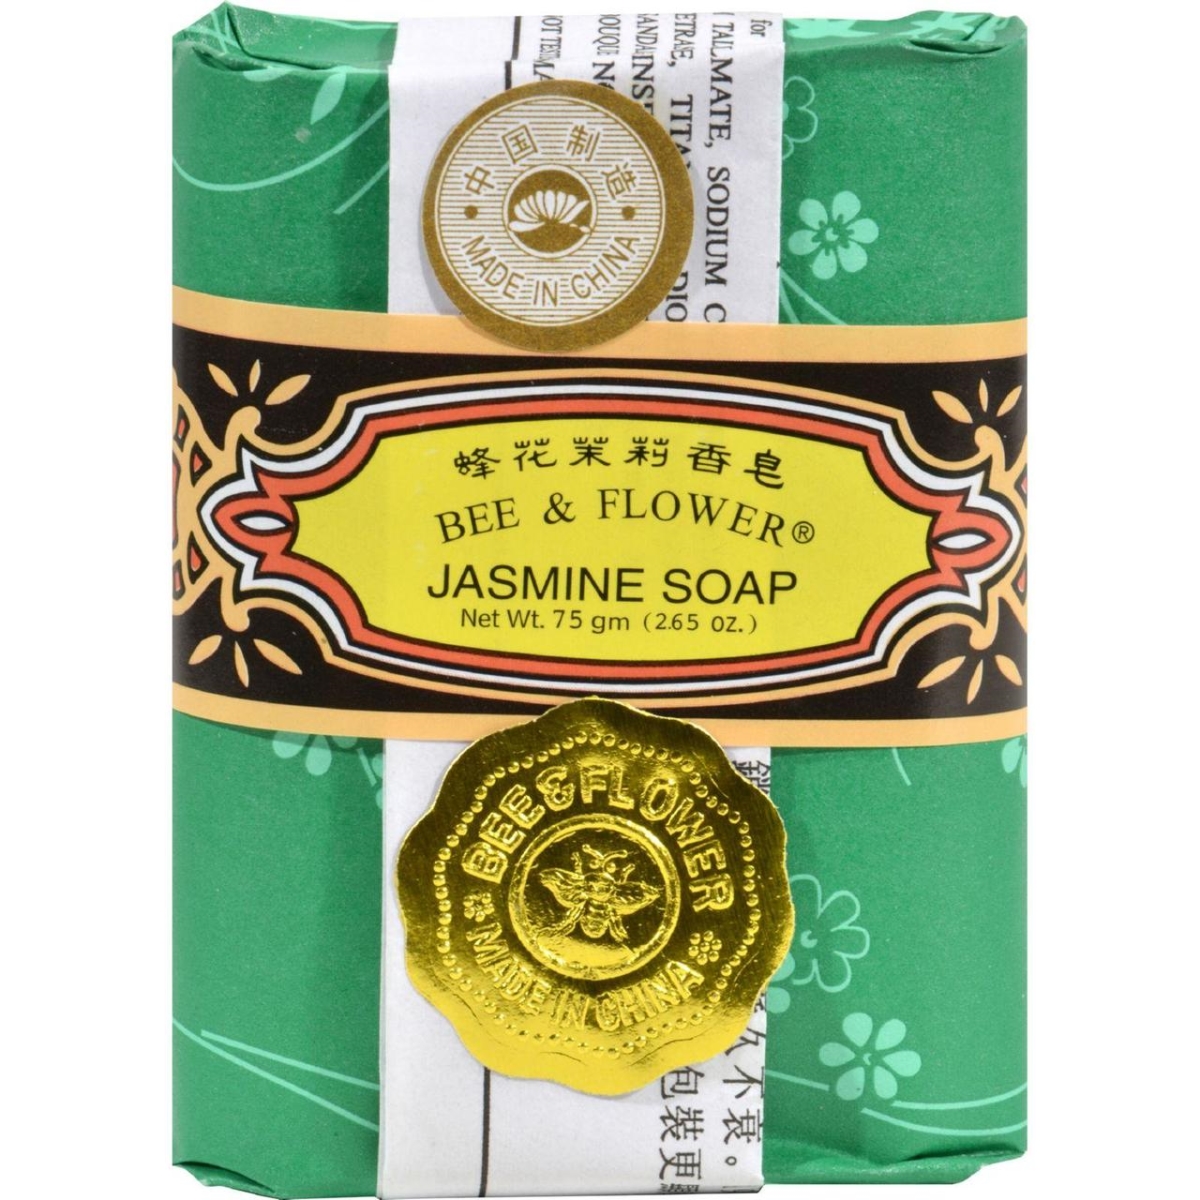 Picture of Bee And Flower HG0324400 2.65 oz Jasmine Soap - Case of 12